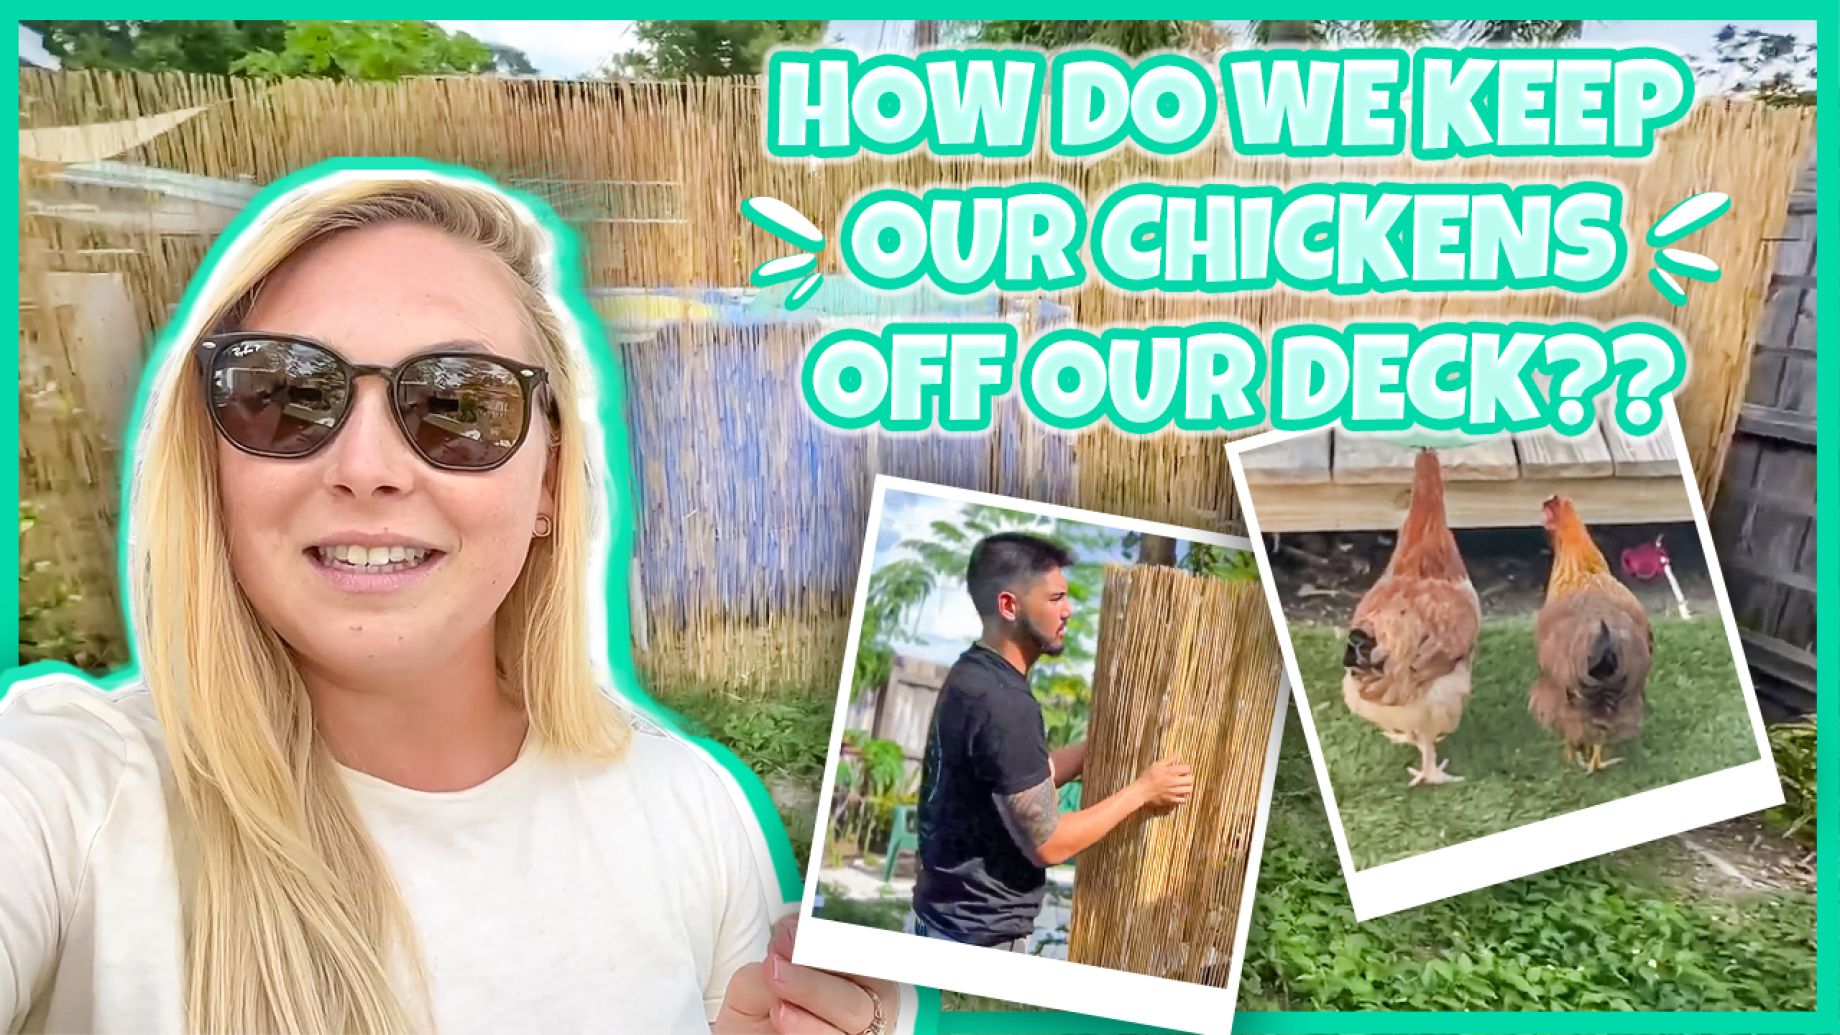 BUILDING A CHICKEN FENCE | Keeping Free Range Chickens Off Our Deck | Tampa Bay Urban Homesteading